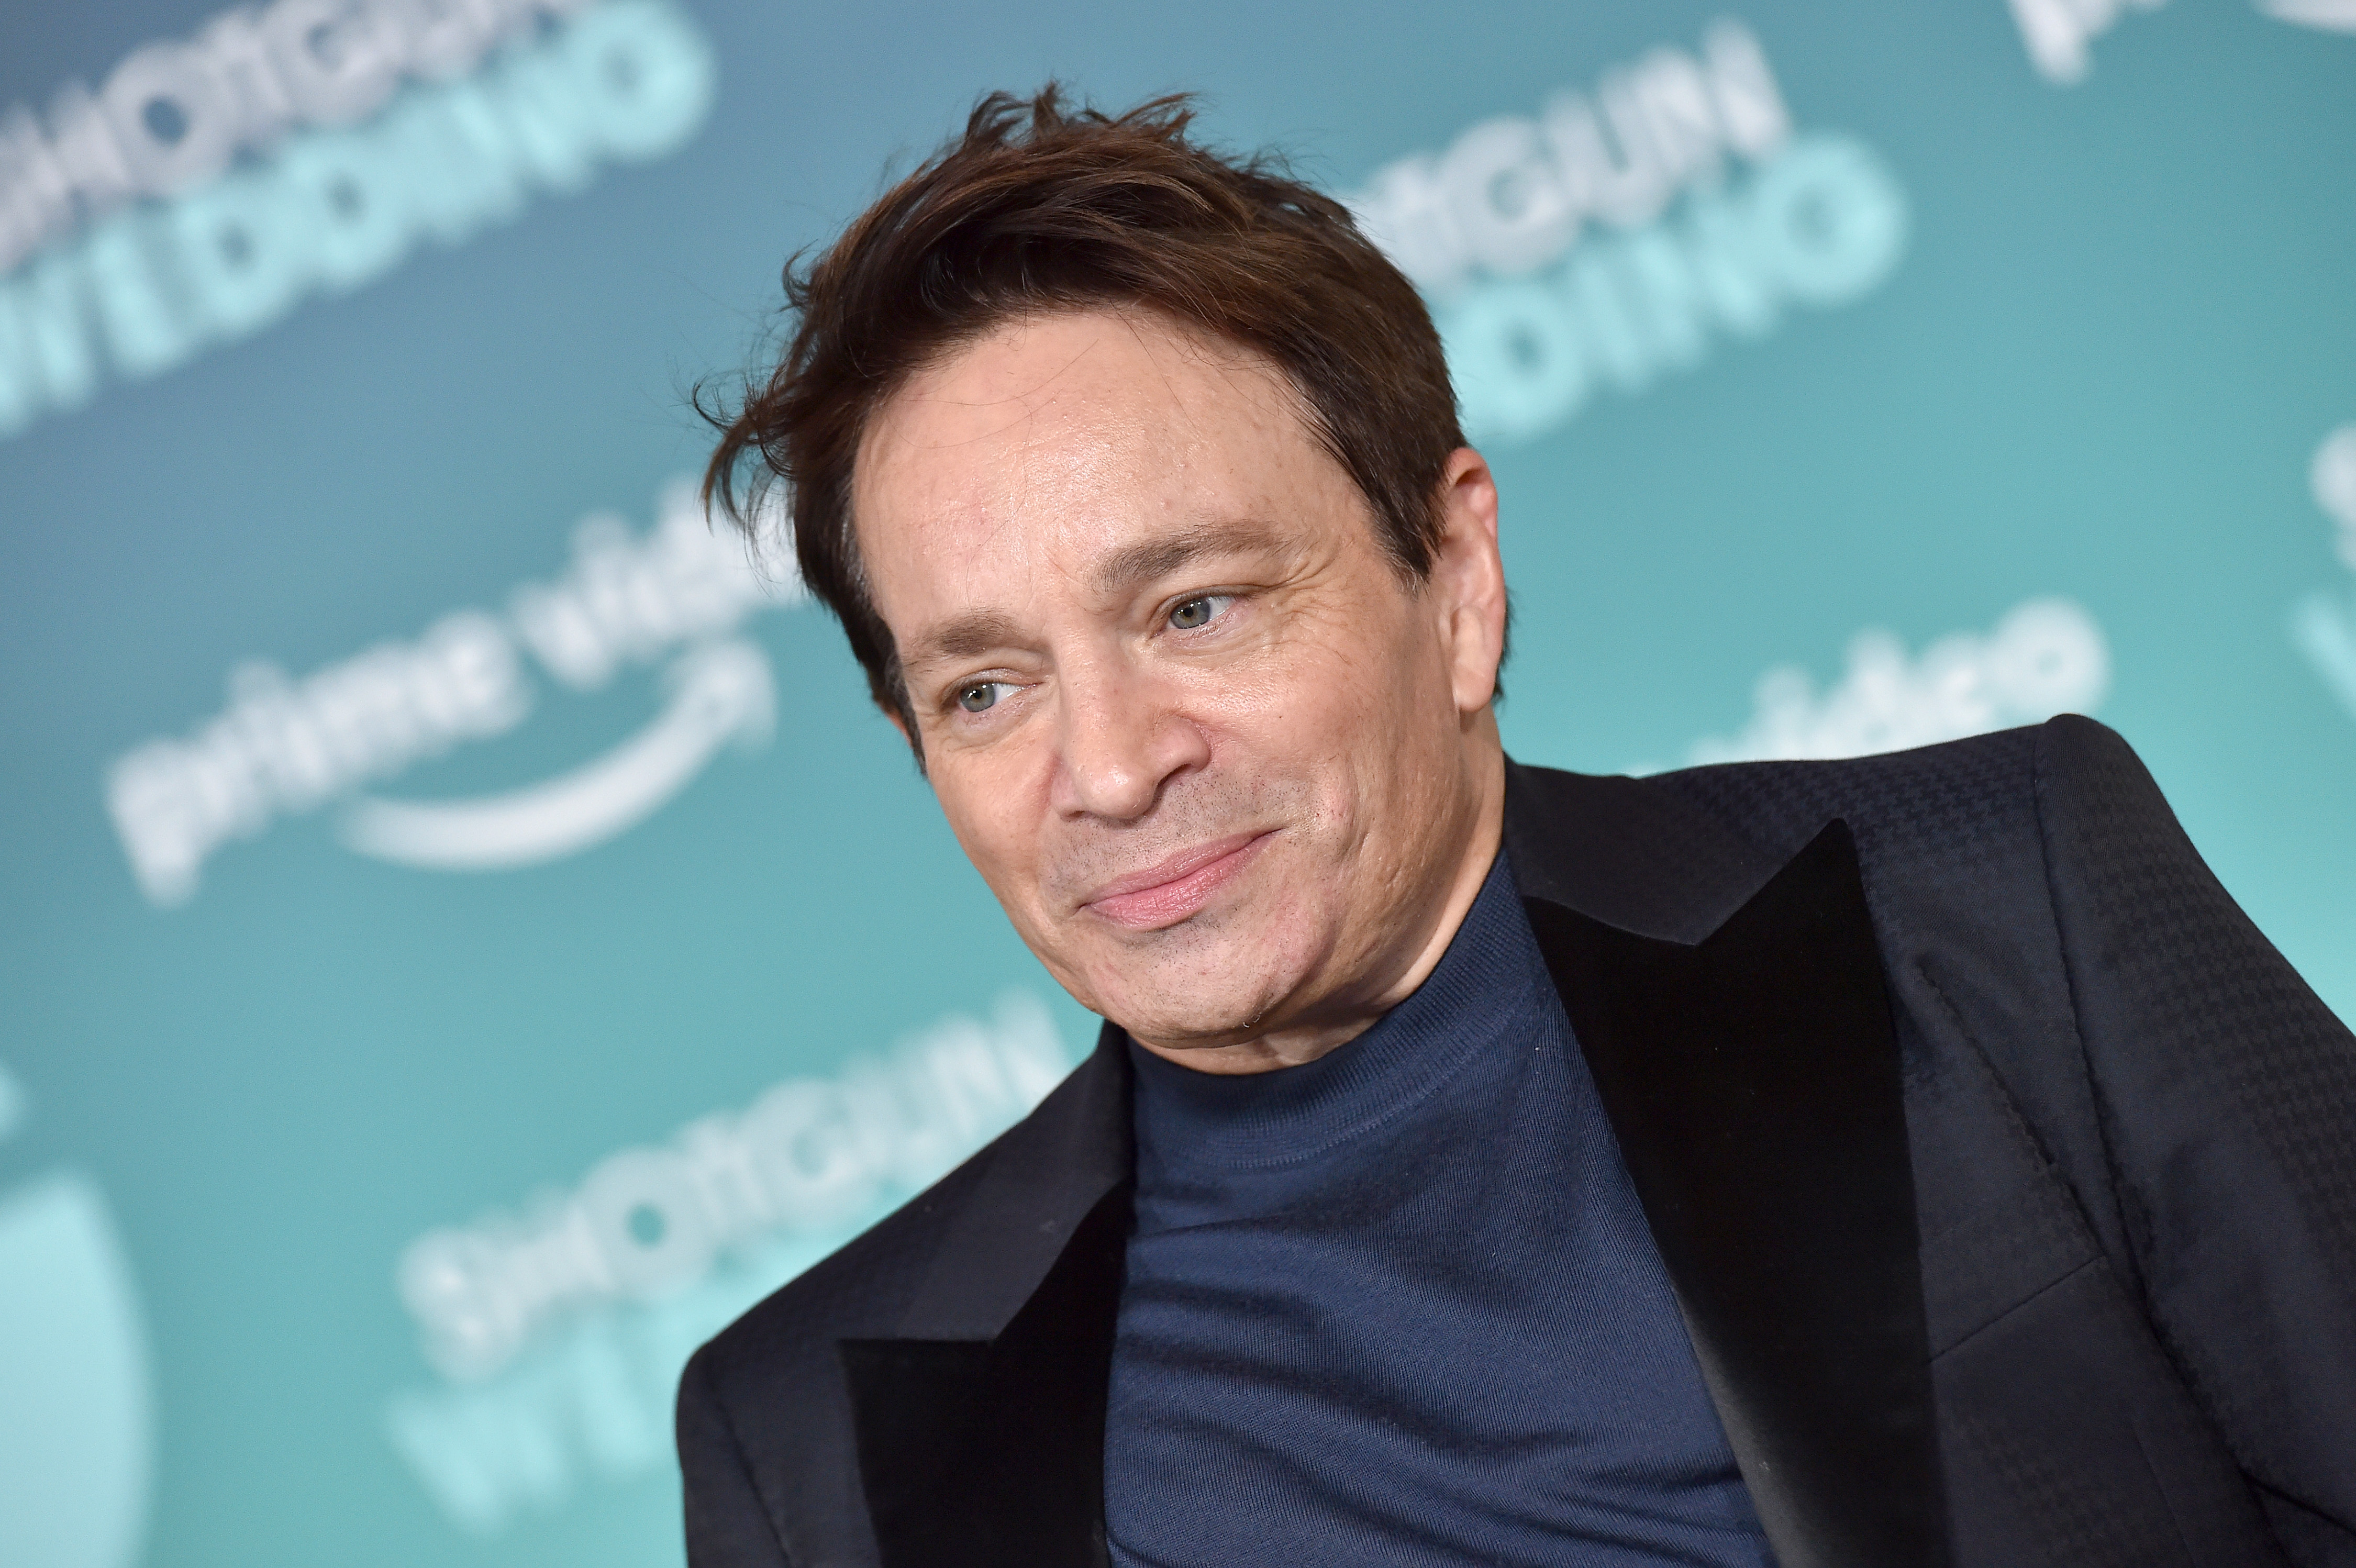 Chris Kattan at the Los Angeles premiere of Prime Video's "Shotgun Wedding" at TCL Chinese Theatre on January 18, 2023 in Hollywood, California | Source: Getty Images